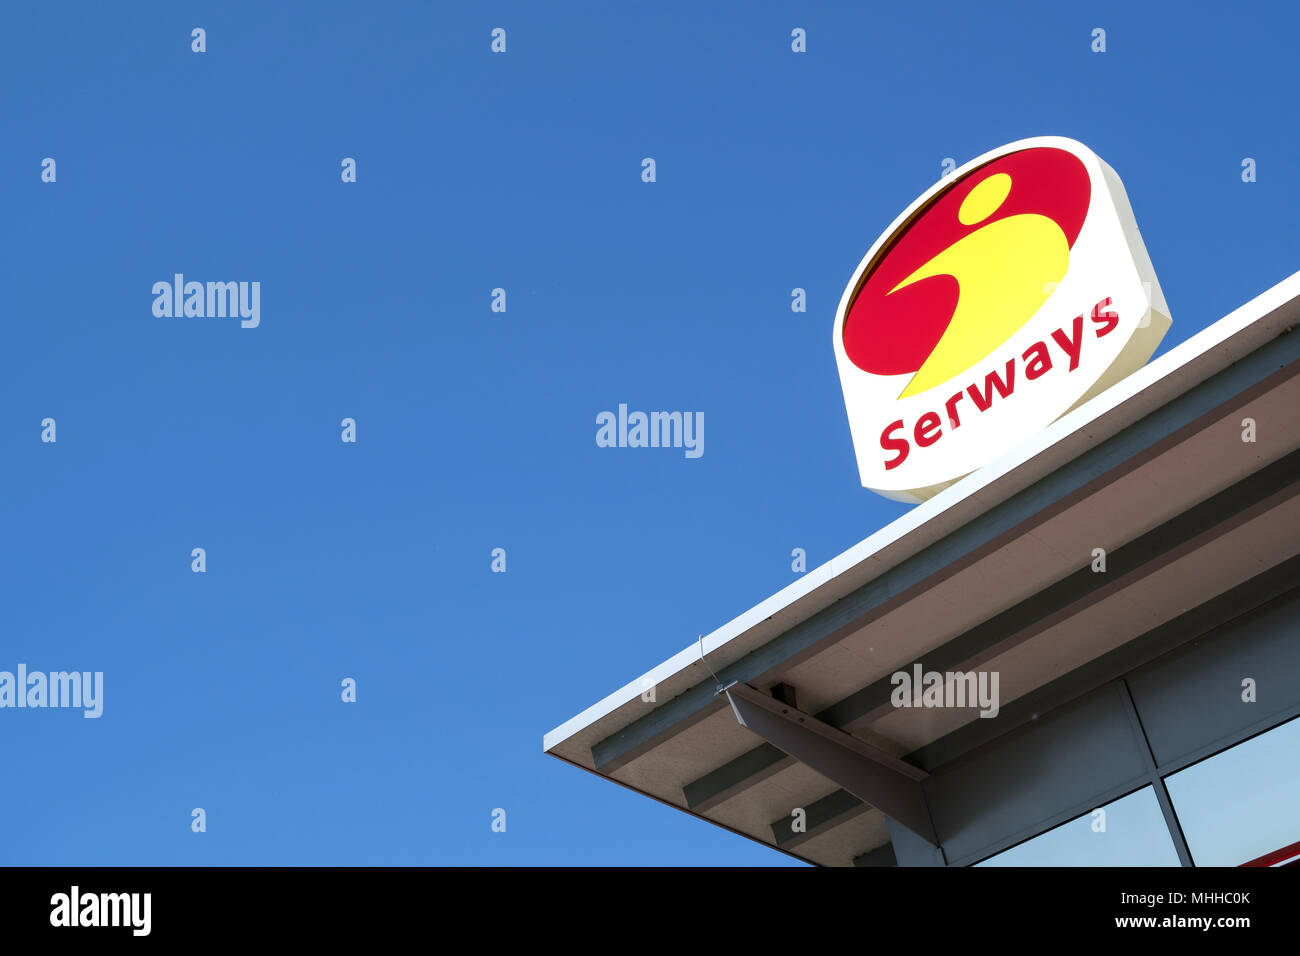 Serways sign against blue sky. Serways is a brand of Tank & Rast, which leases, operates and manages motorway service stations in Germany. Stock Photo